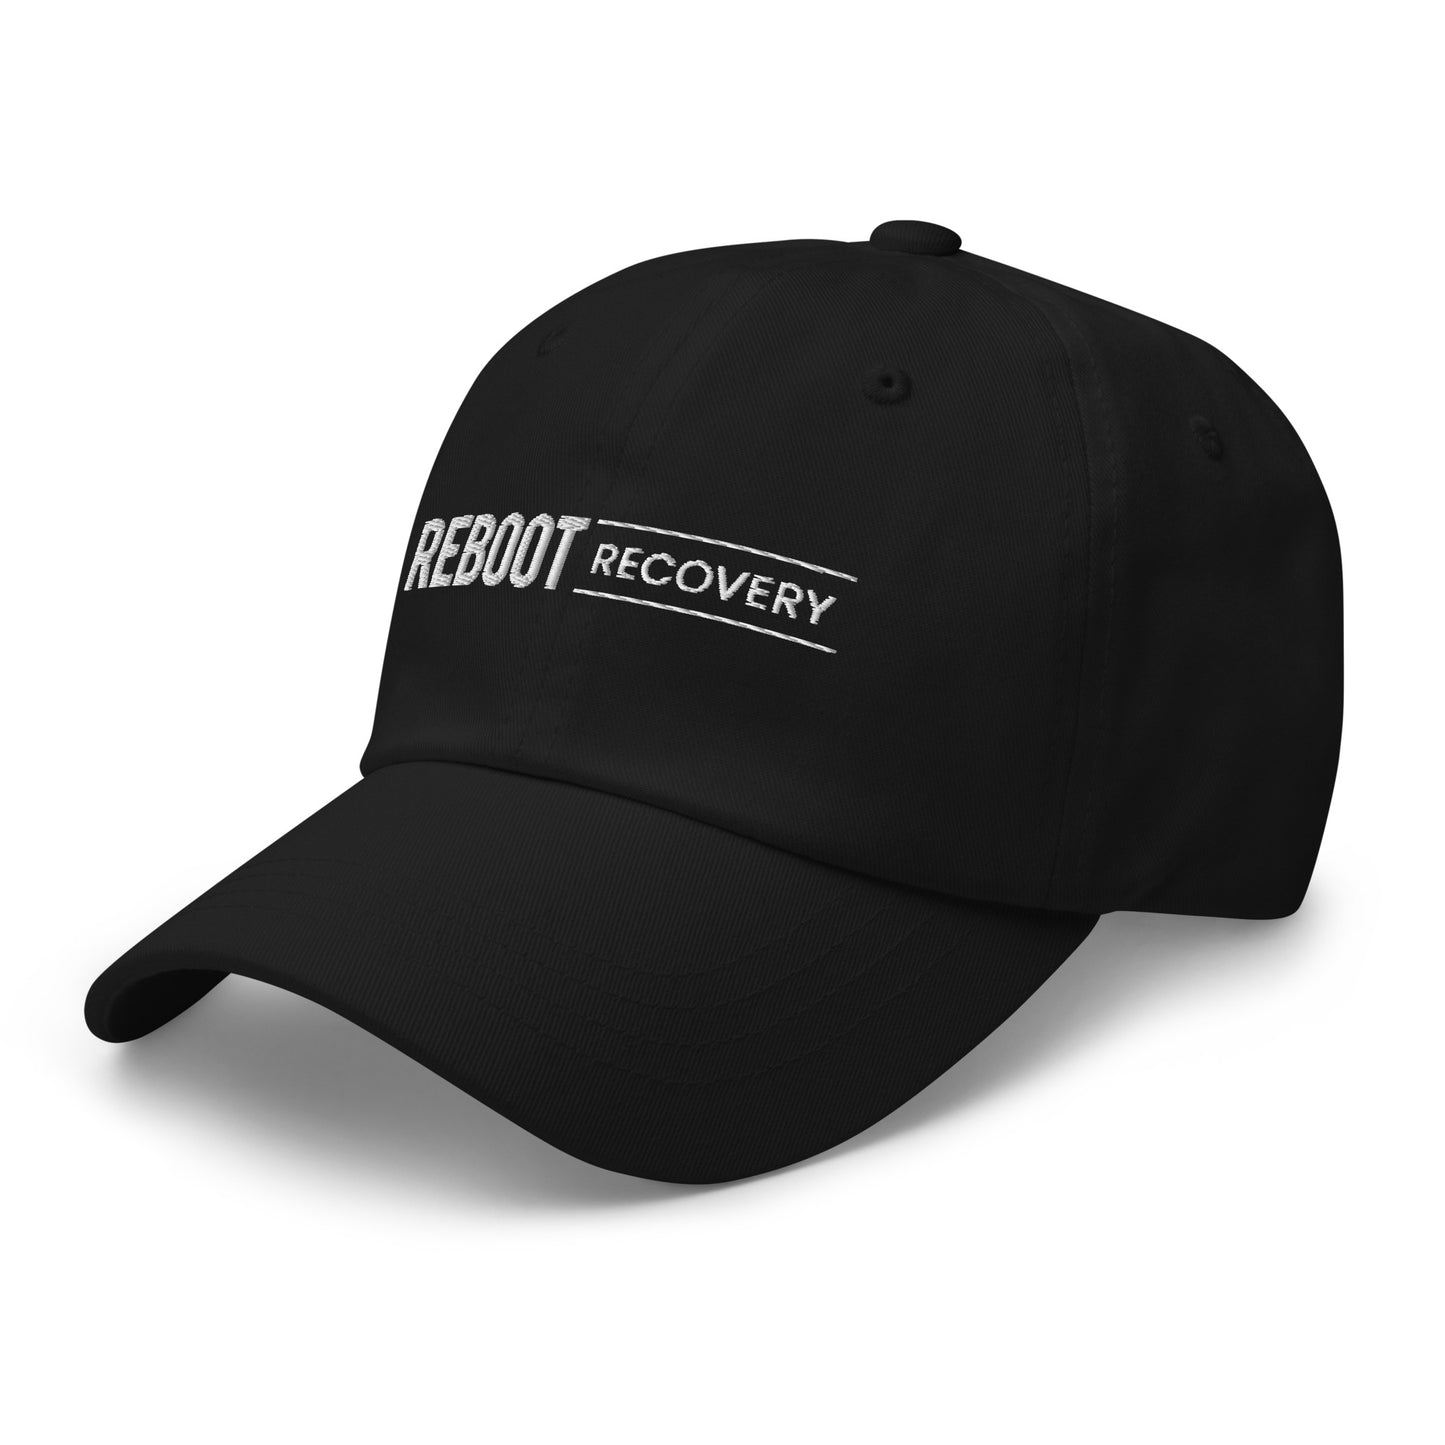 REBOOT Recovery Dad hat